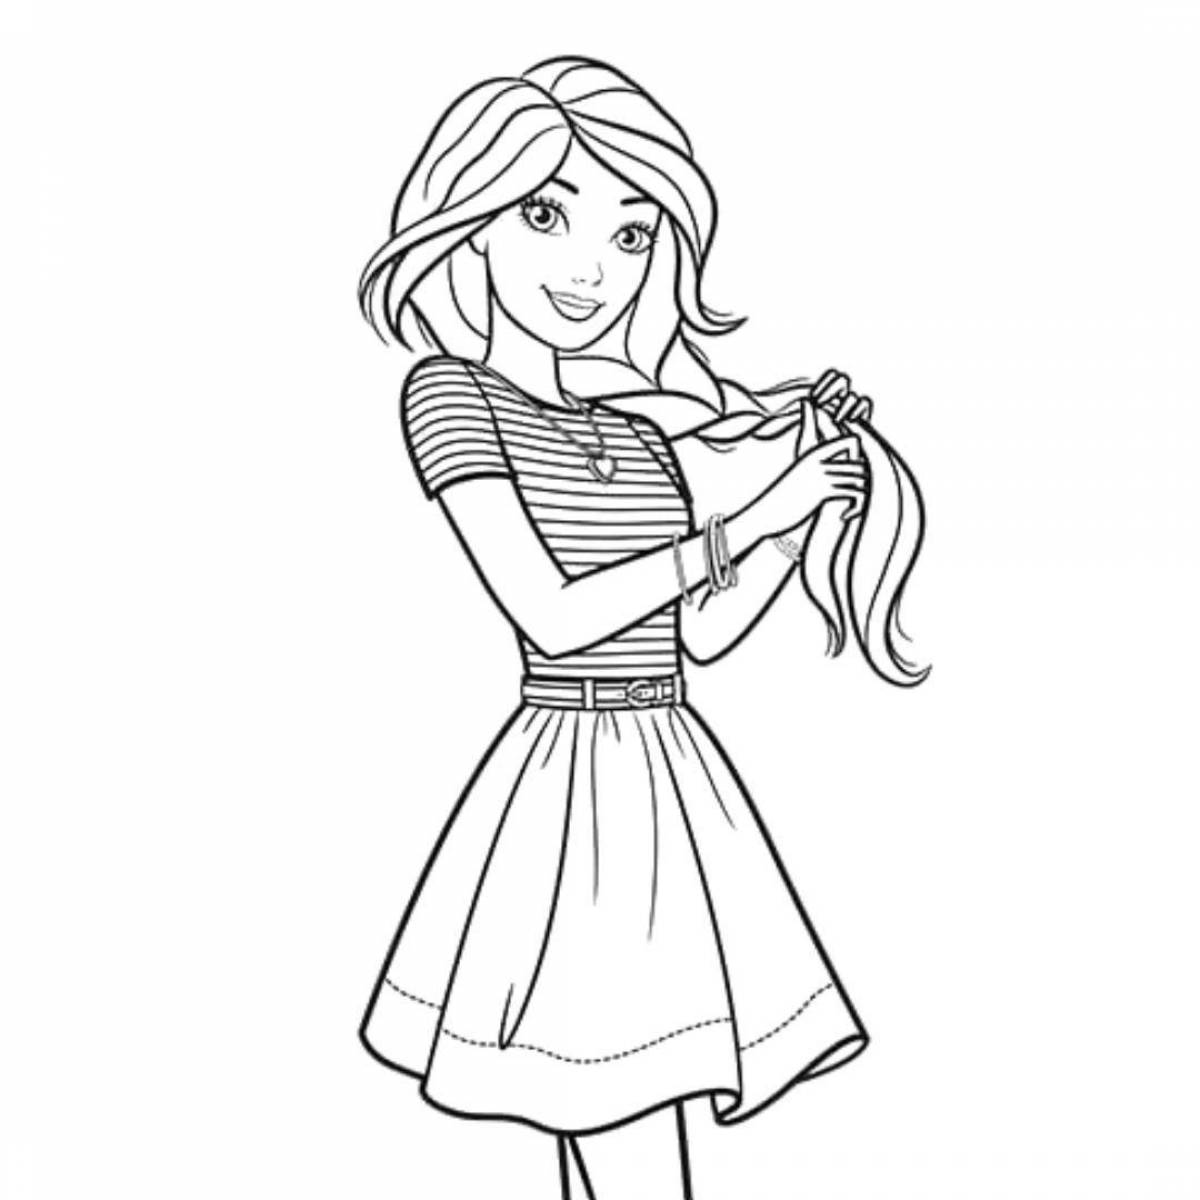 Full-length riotous coloring page